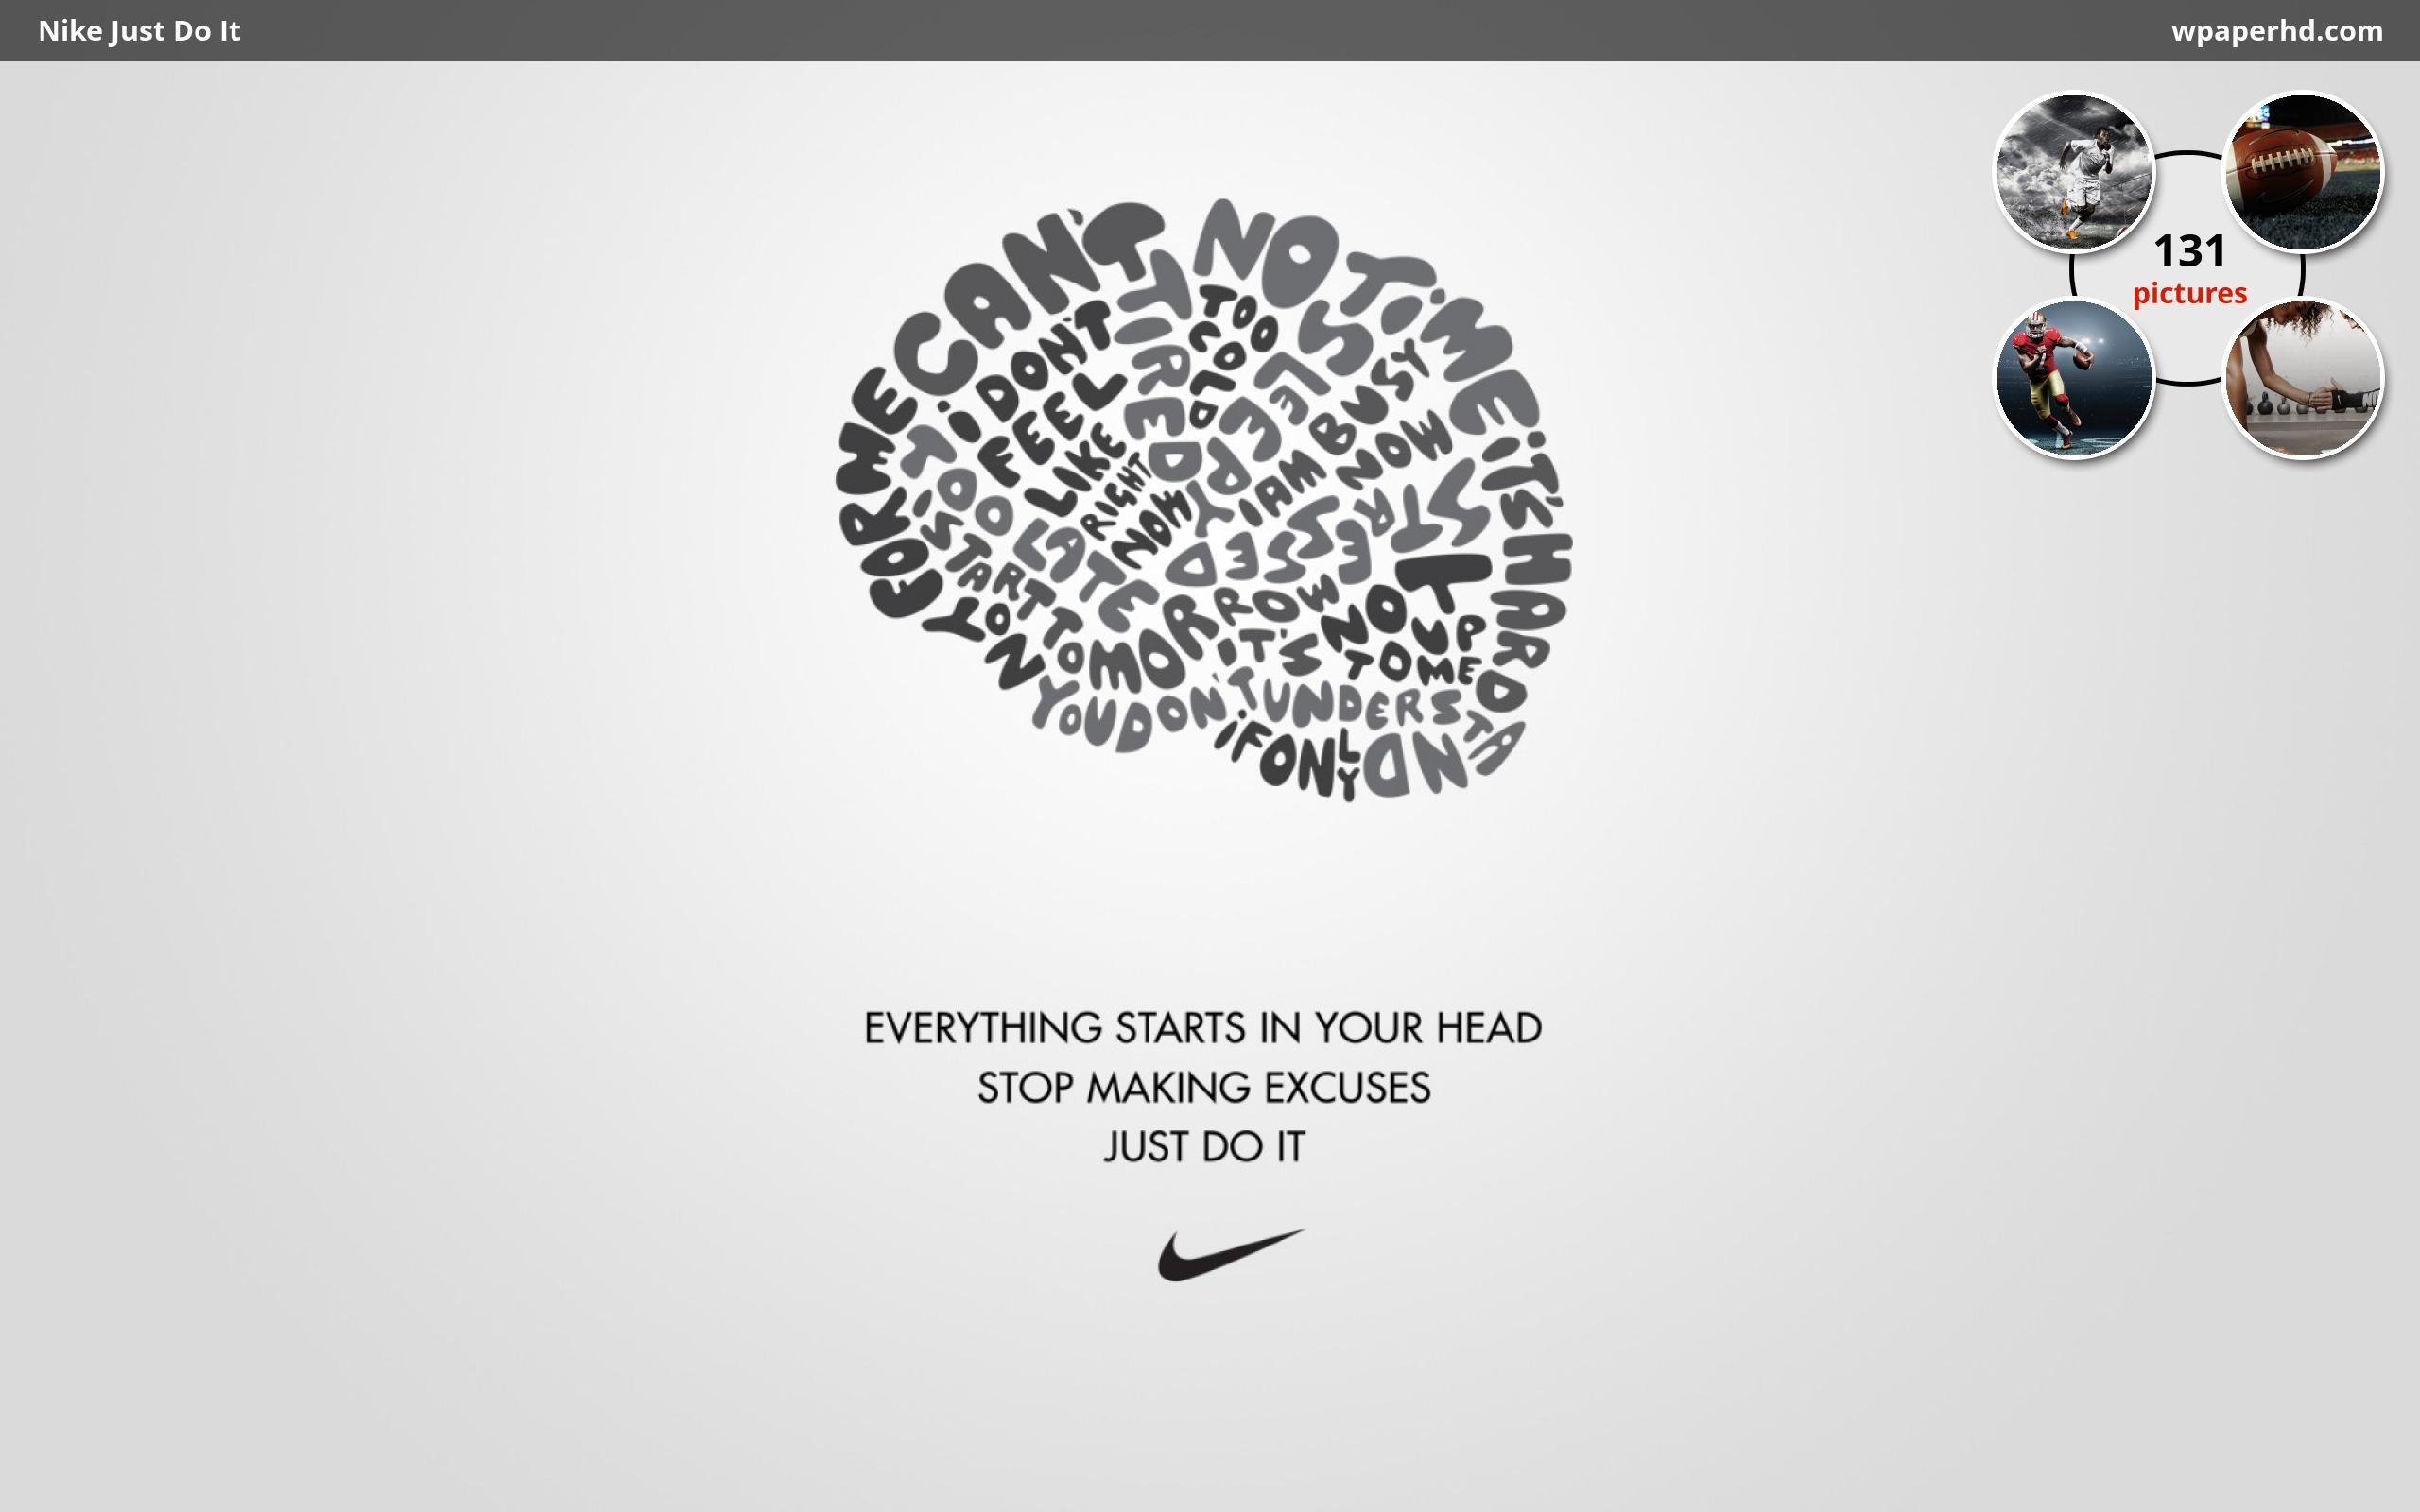 2560x1600 Nike Just Do It Wallpaper For Android #wu0